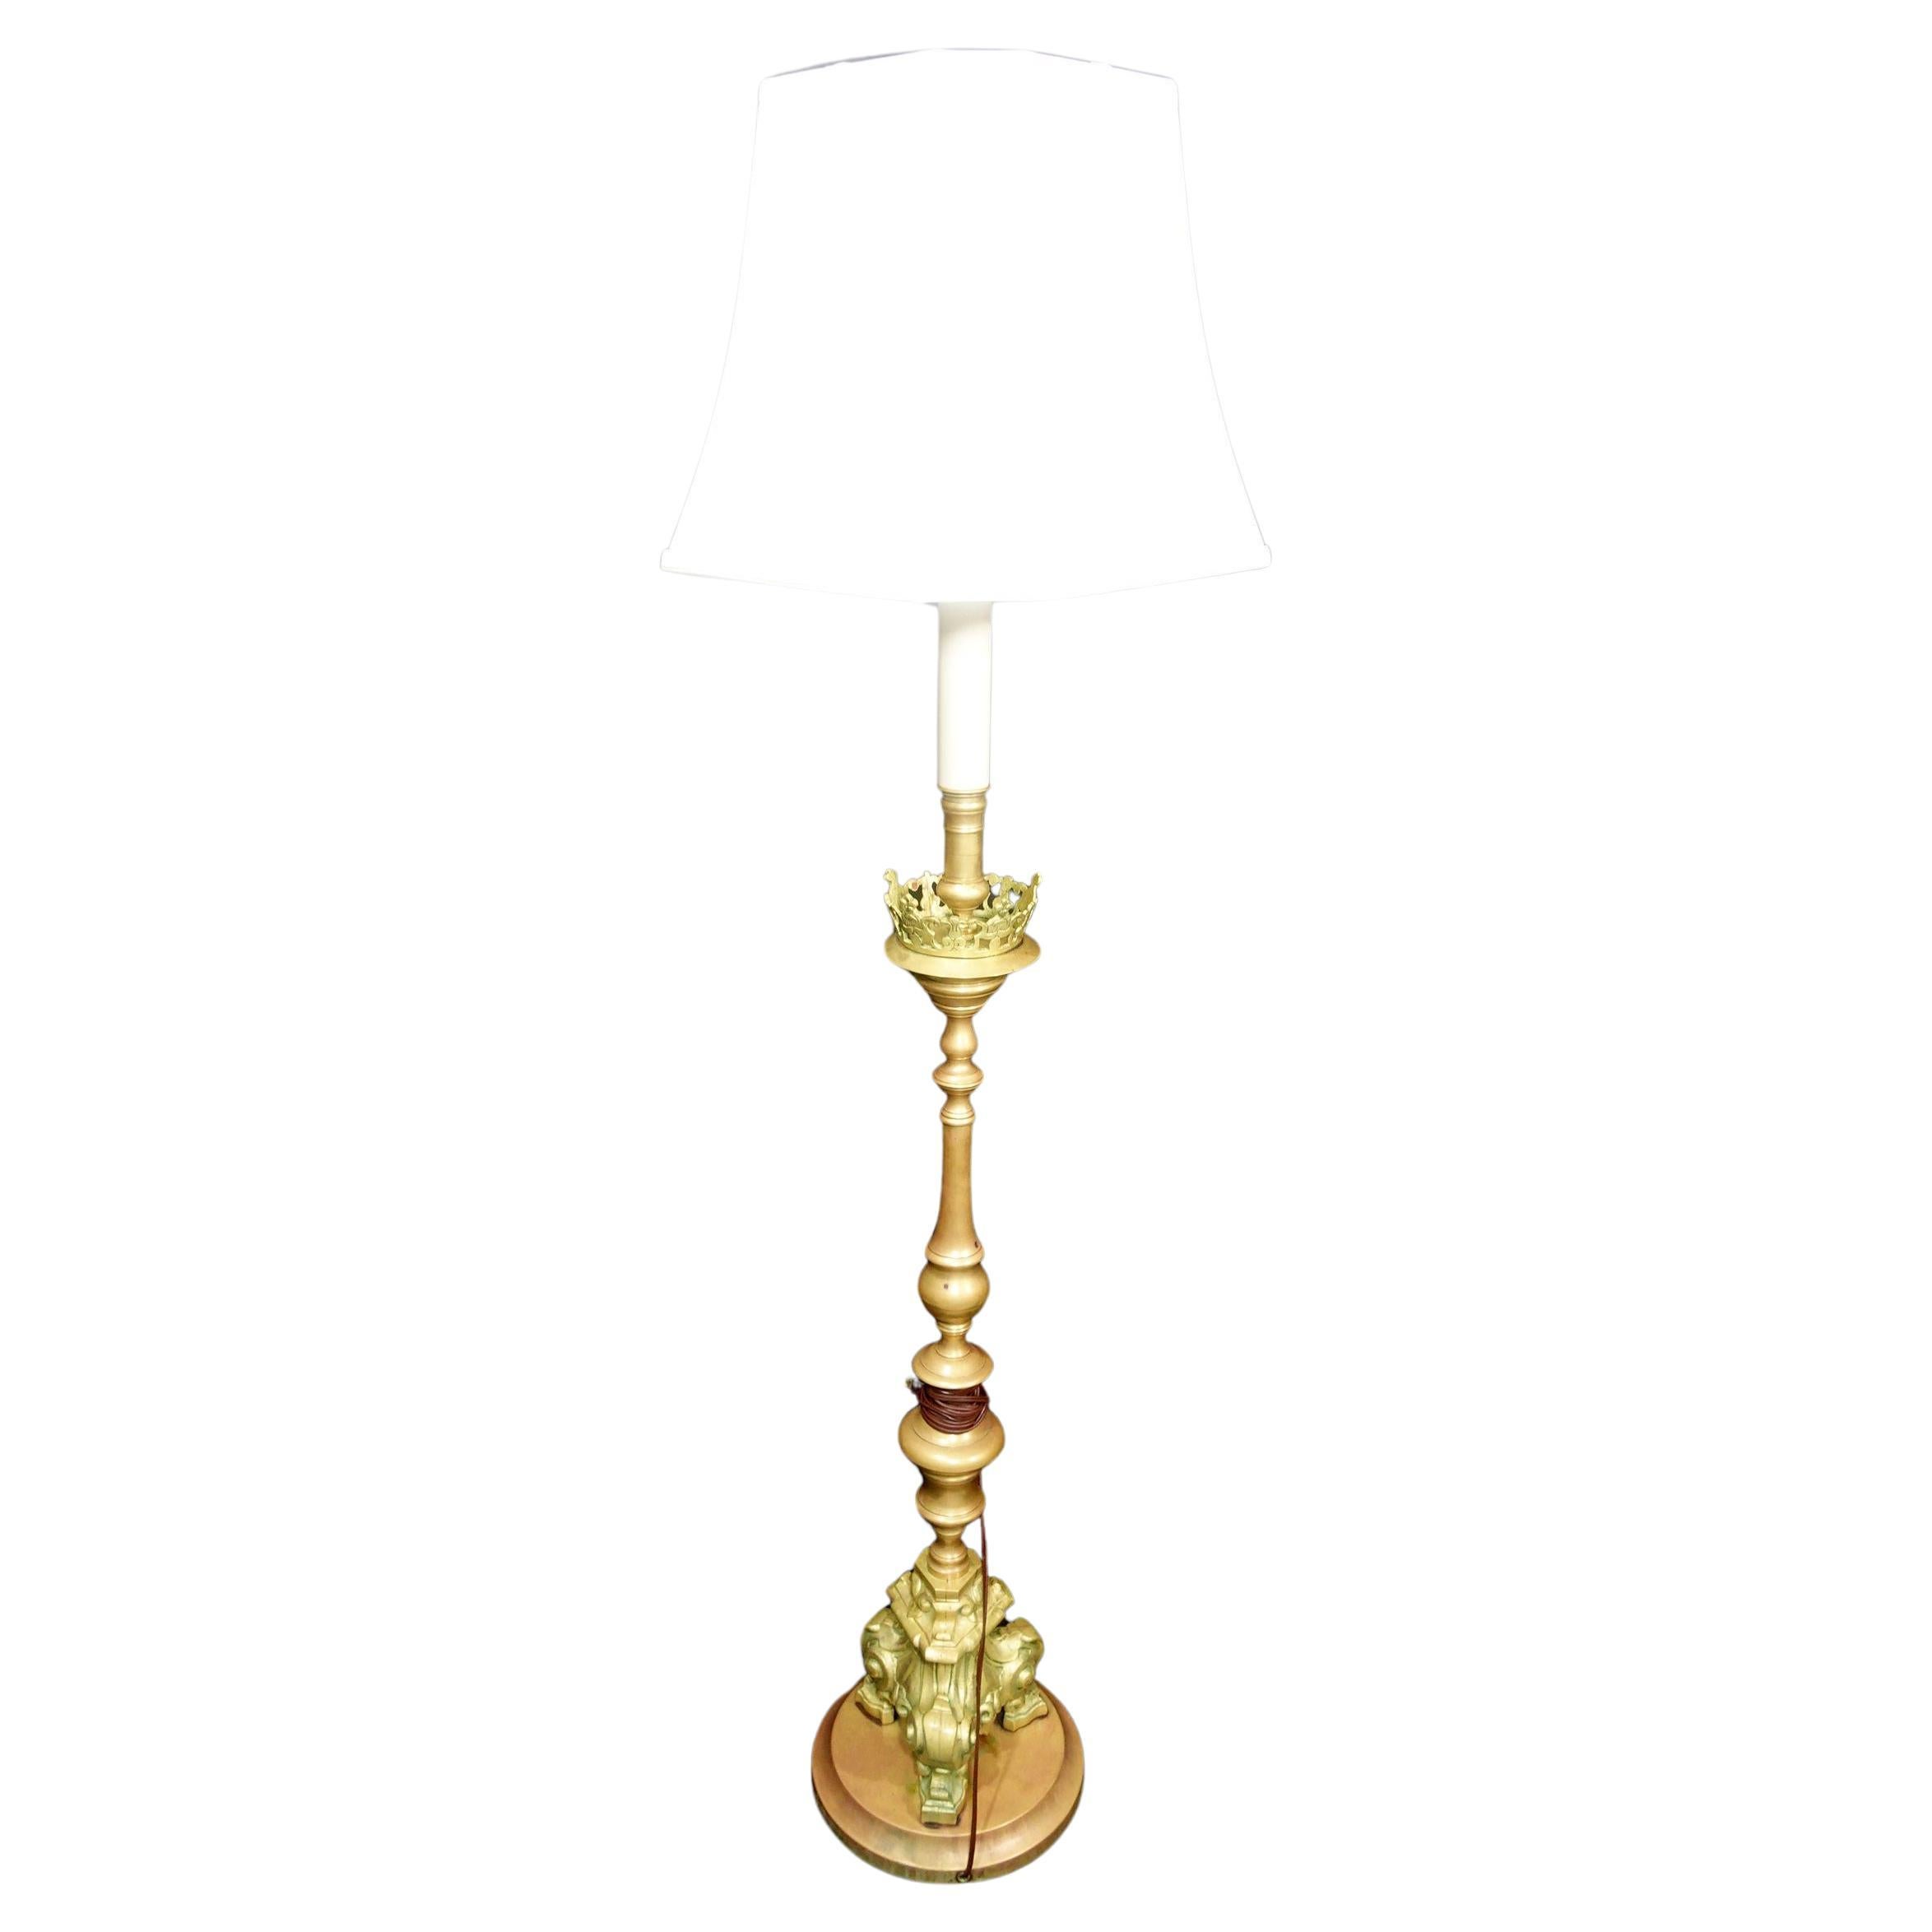 A Heavy Baroque Revival Brass floor lamp form of an alter candlestick, 19th C. For Sale